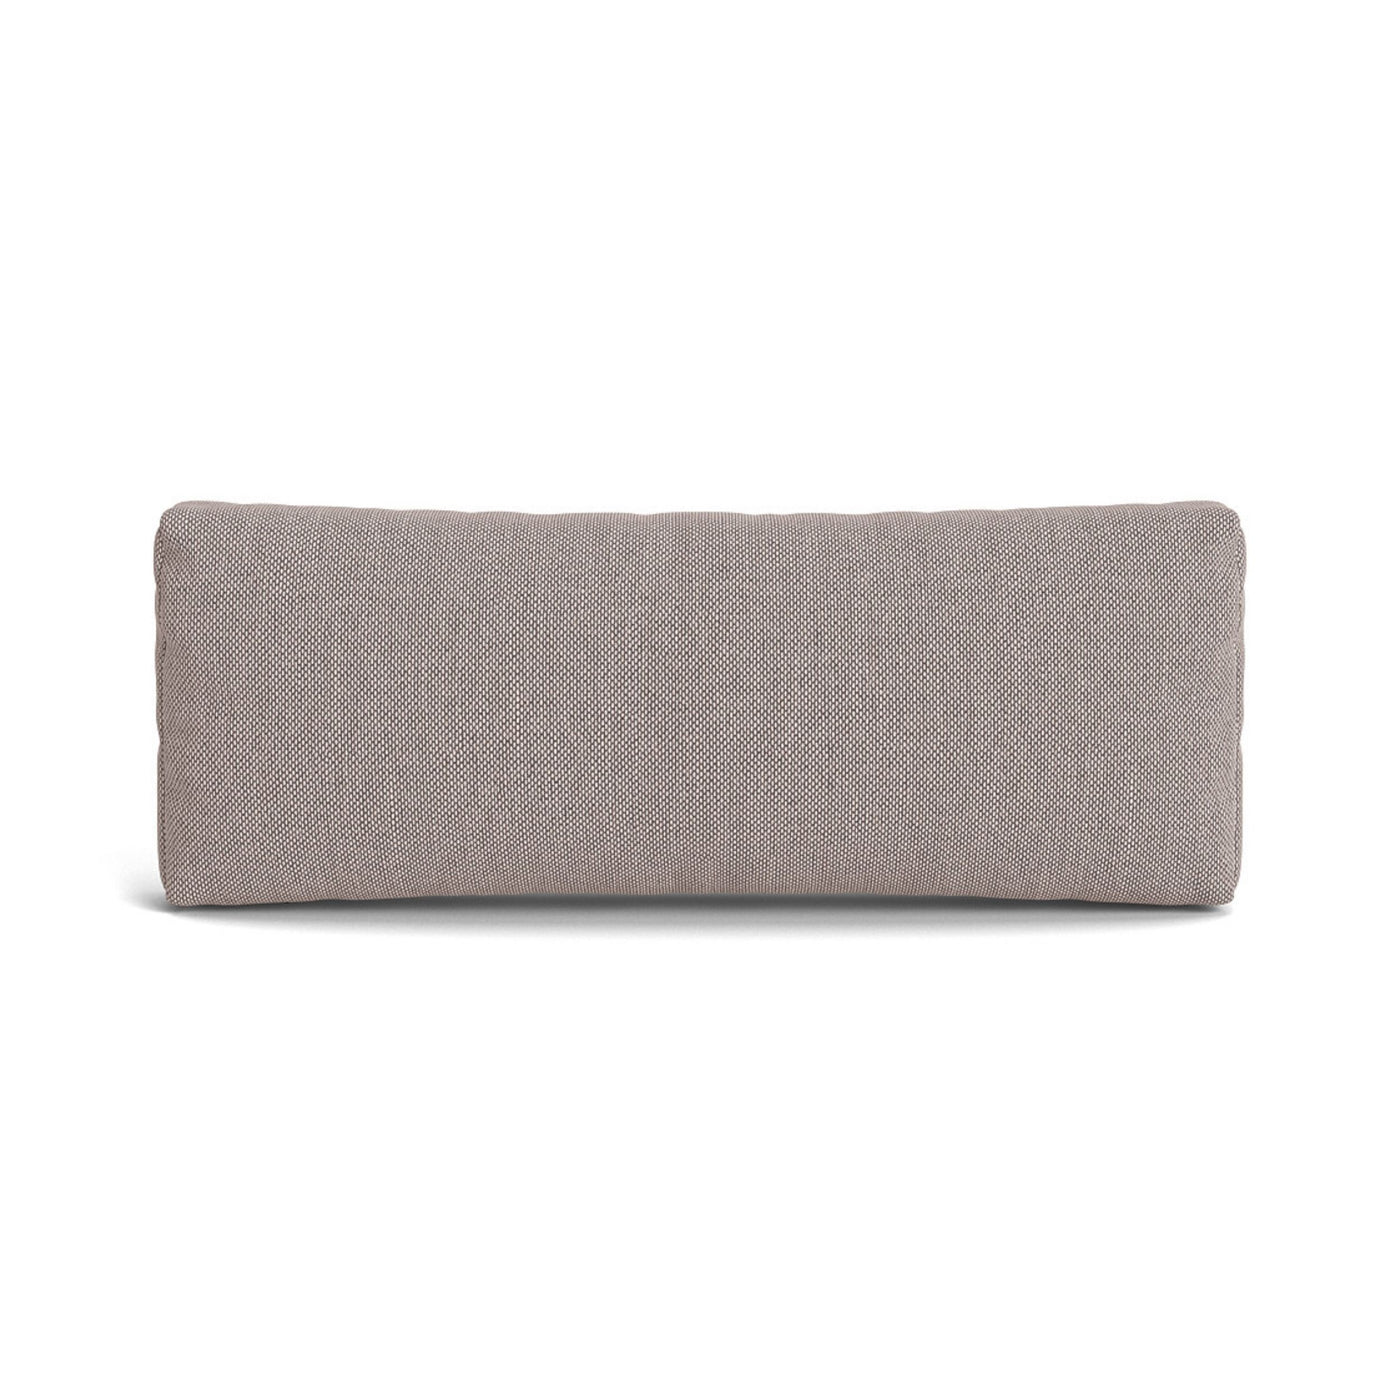 Muuto Connect Soft Modular Sofa Cushion. Shop online at someday designs. #colour_re-wool-628